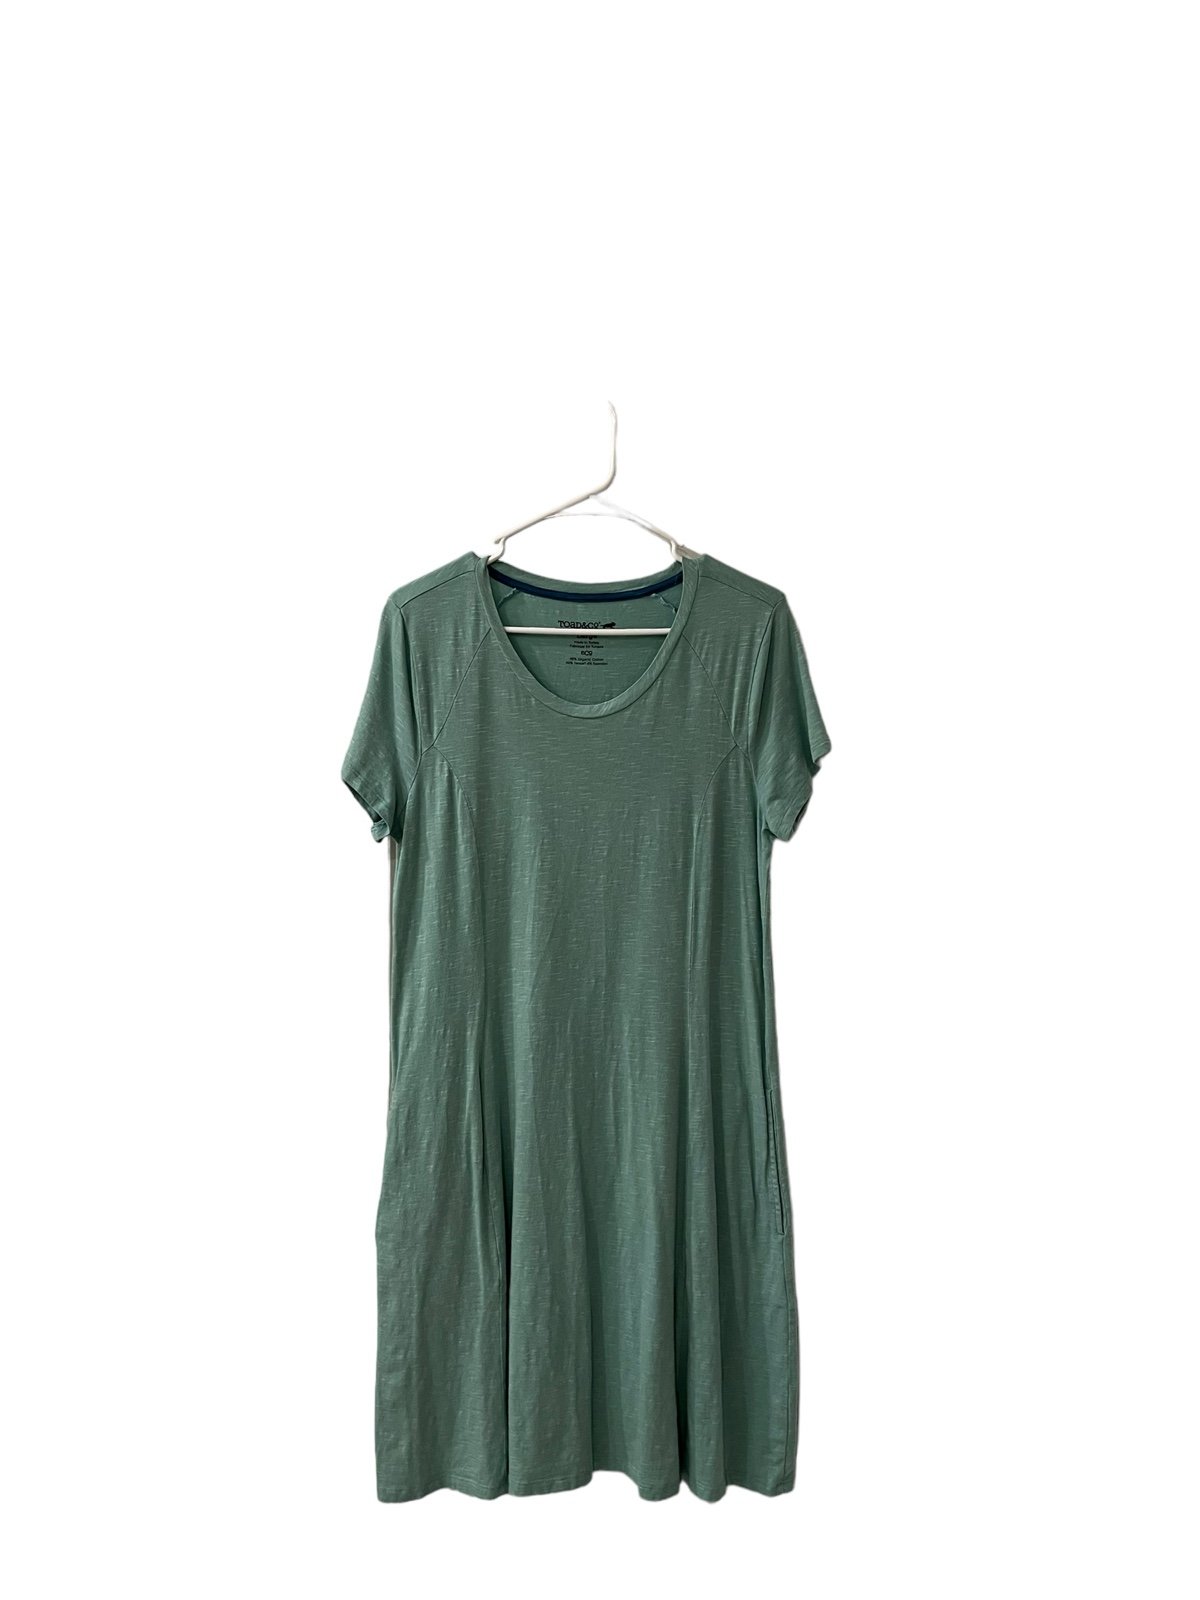 Latest  Toad & Co Blue Green Dress Size Lg NoY2t80SQ just for you